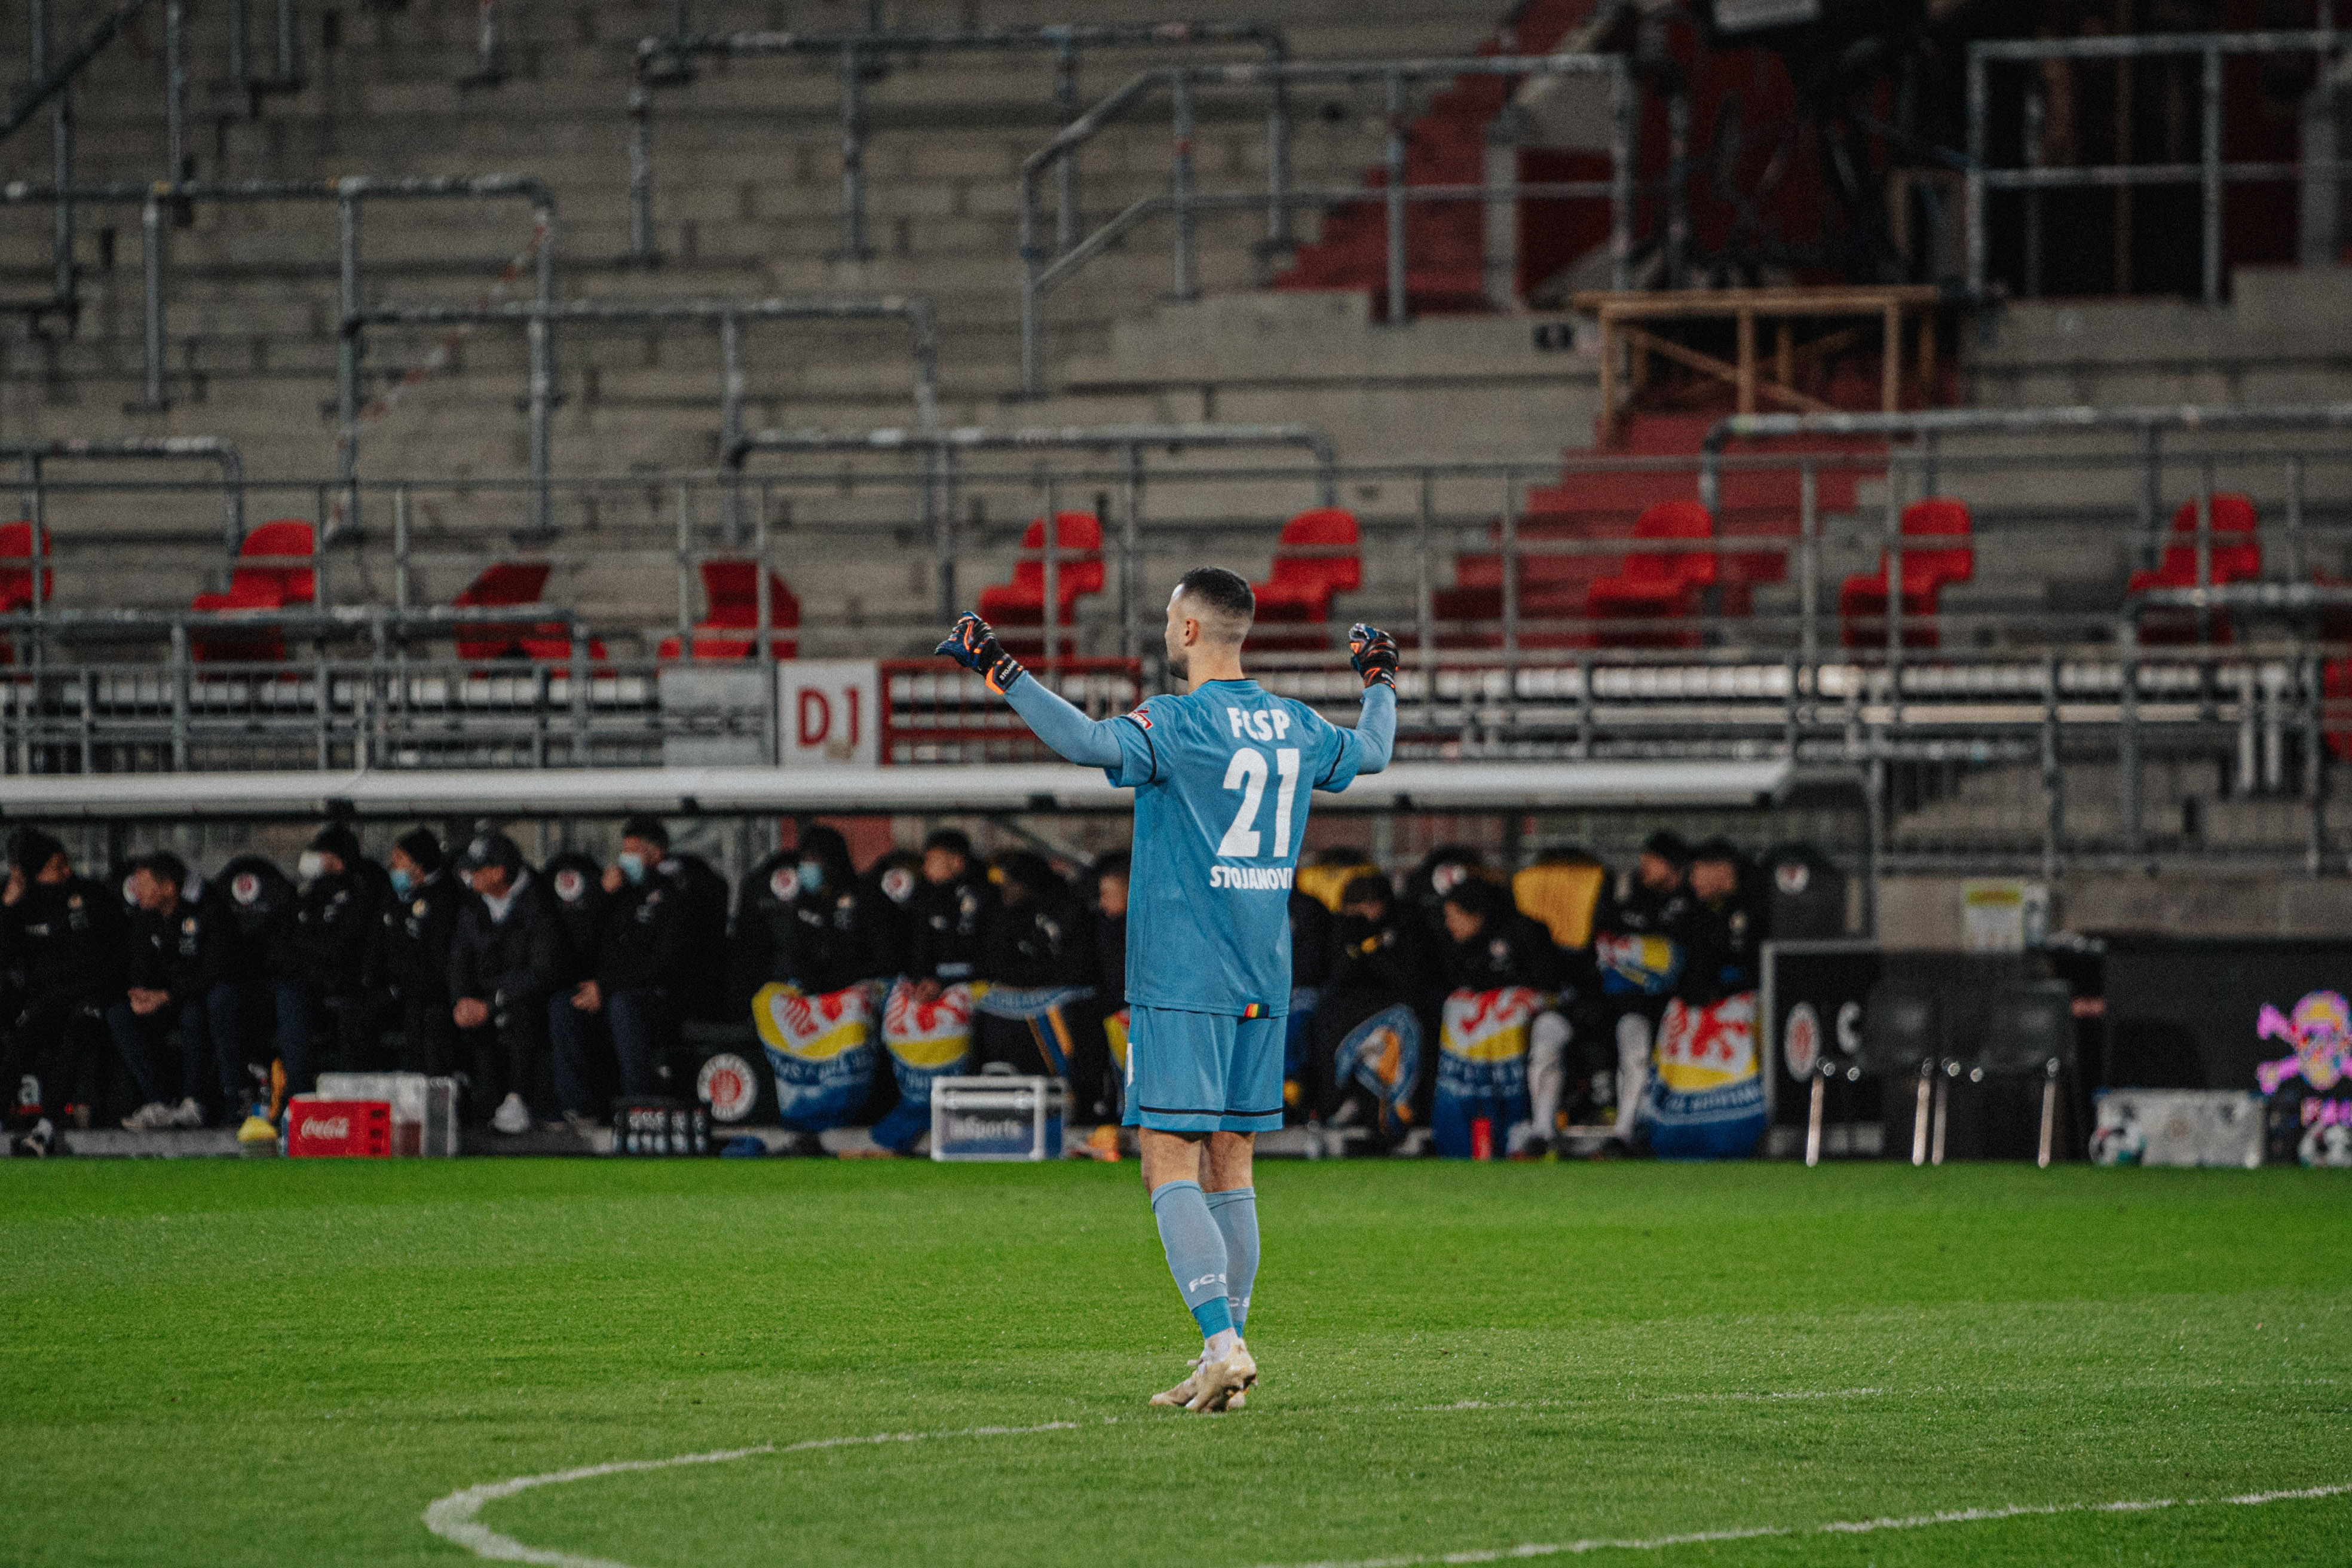 Dejan Stojanović celebrates during the 2-0 defeat of Eintracht Braunschweig in early April, one of 12 victories with him in goal.